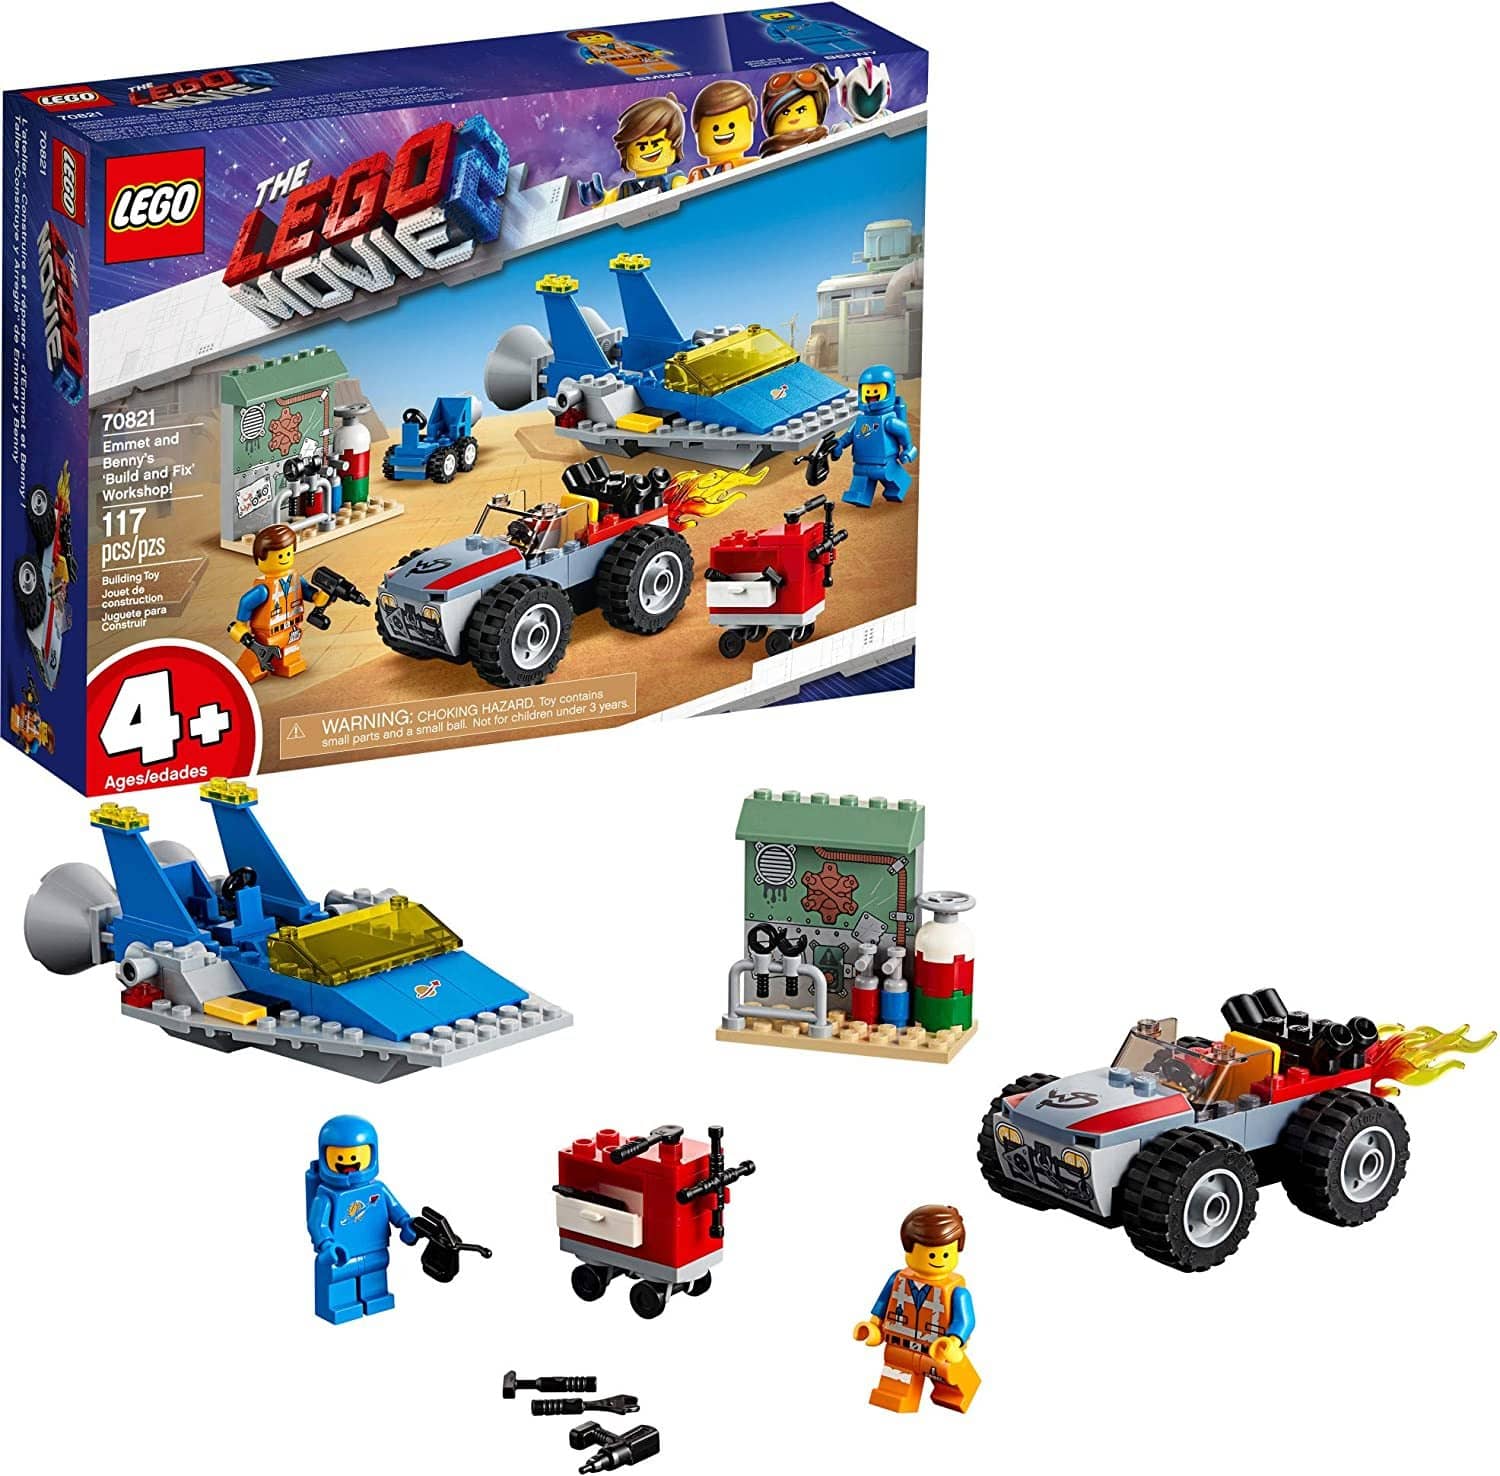 LEGO 70821: LEGO Movie 2: Emmet And Bennys "Build And Fix" Workshop! (117 Pieces)-Kidding Around NYC